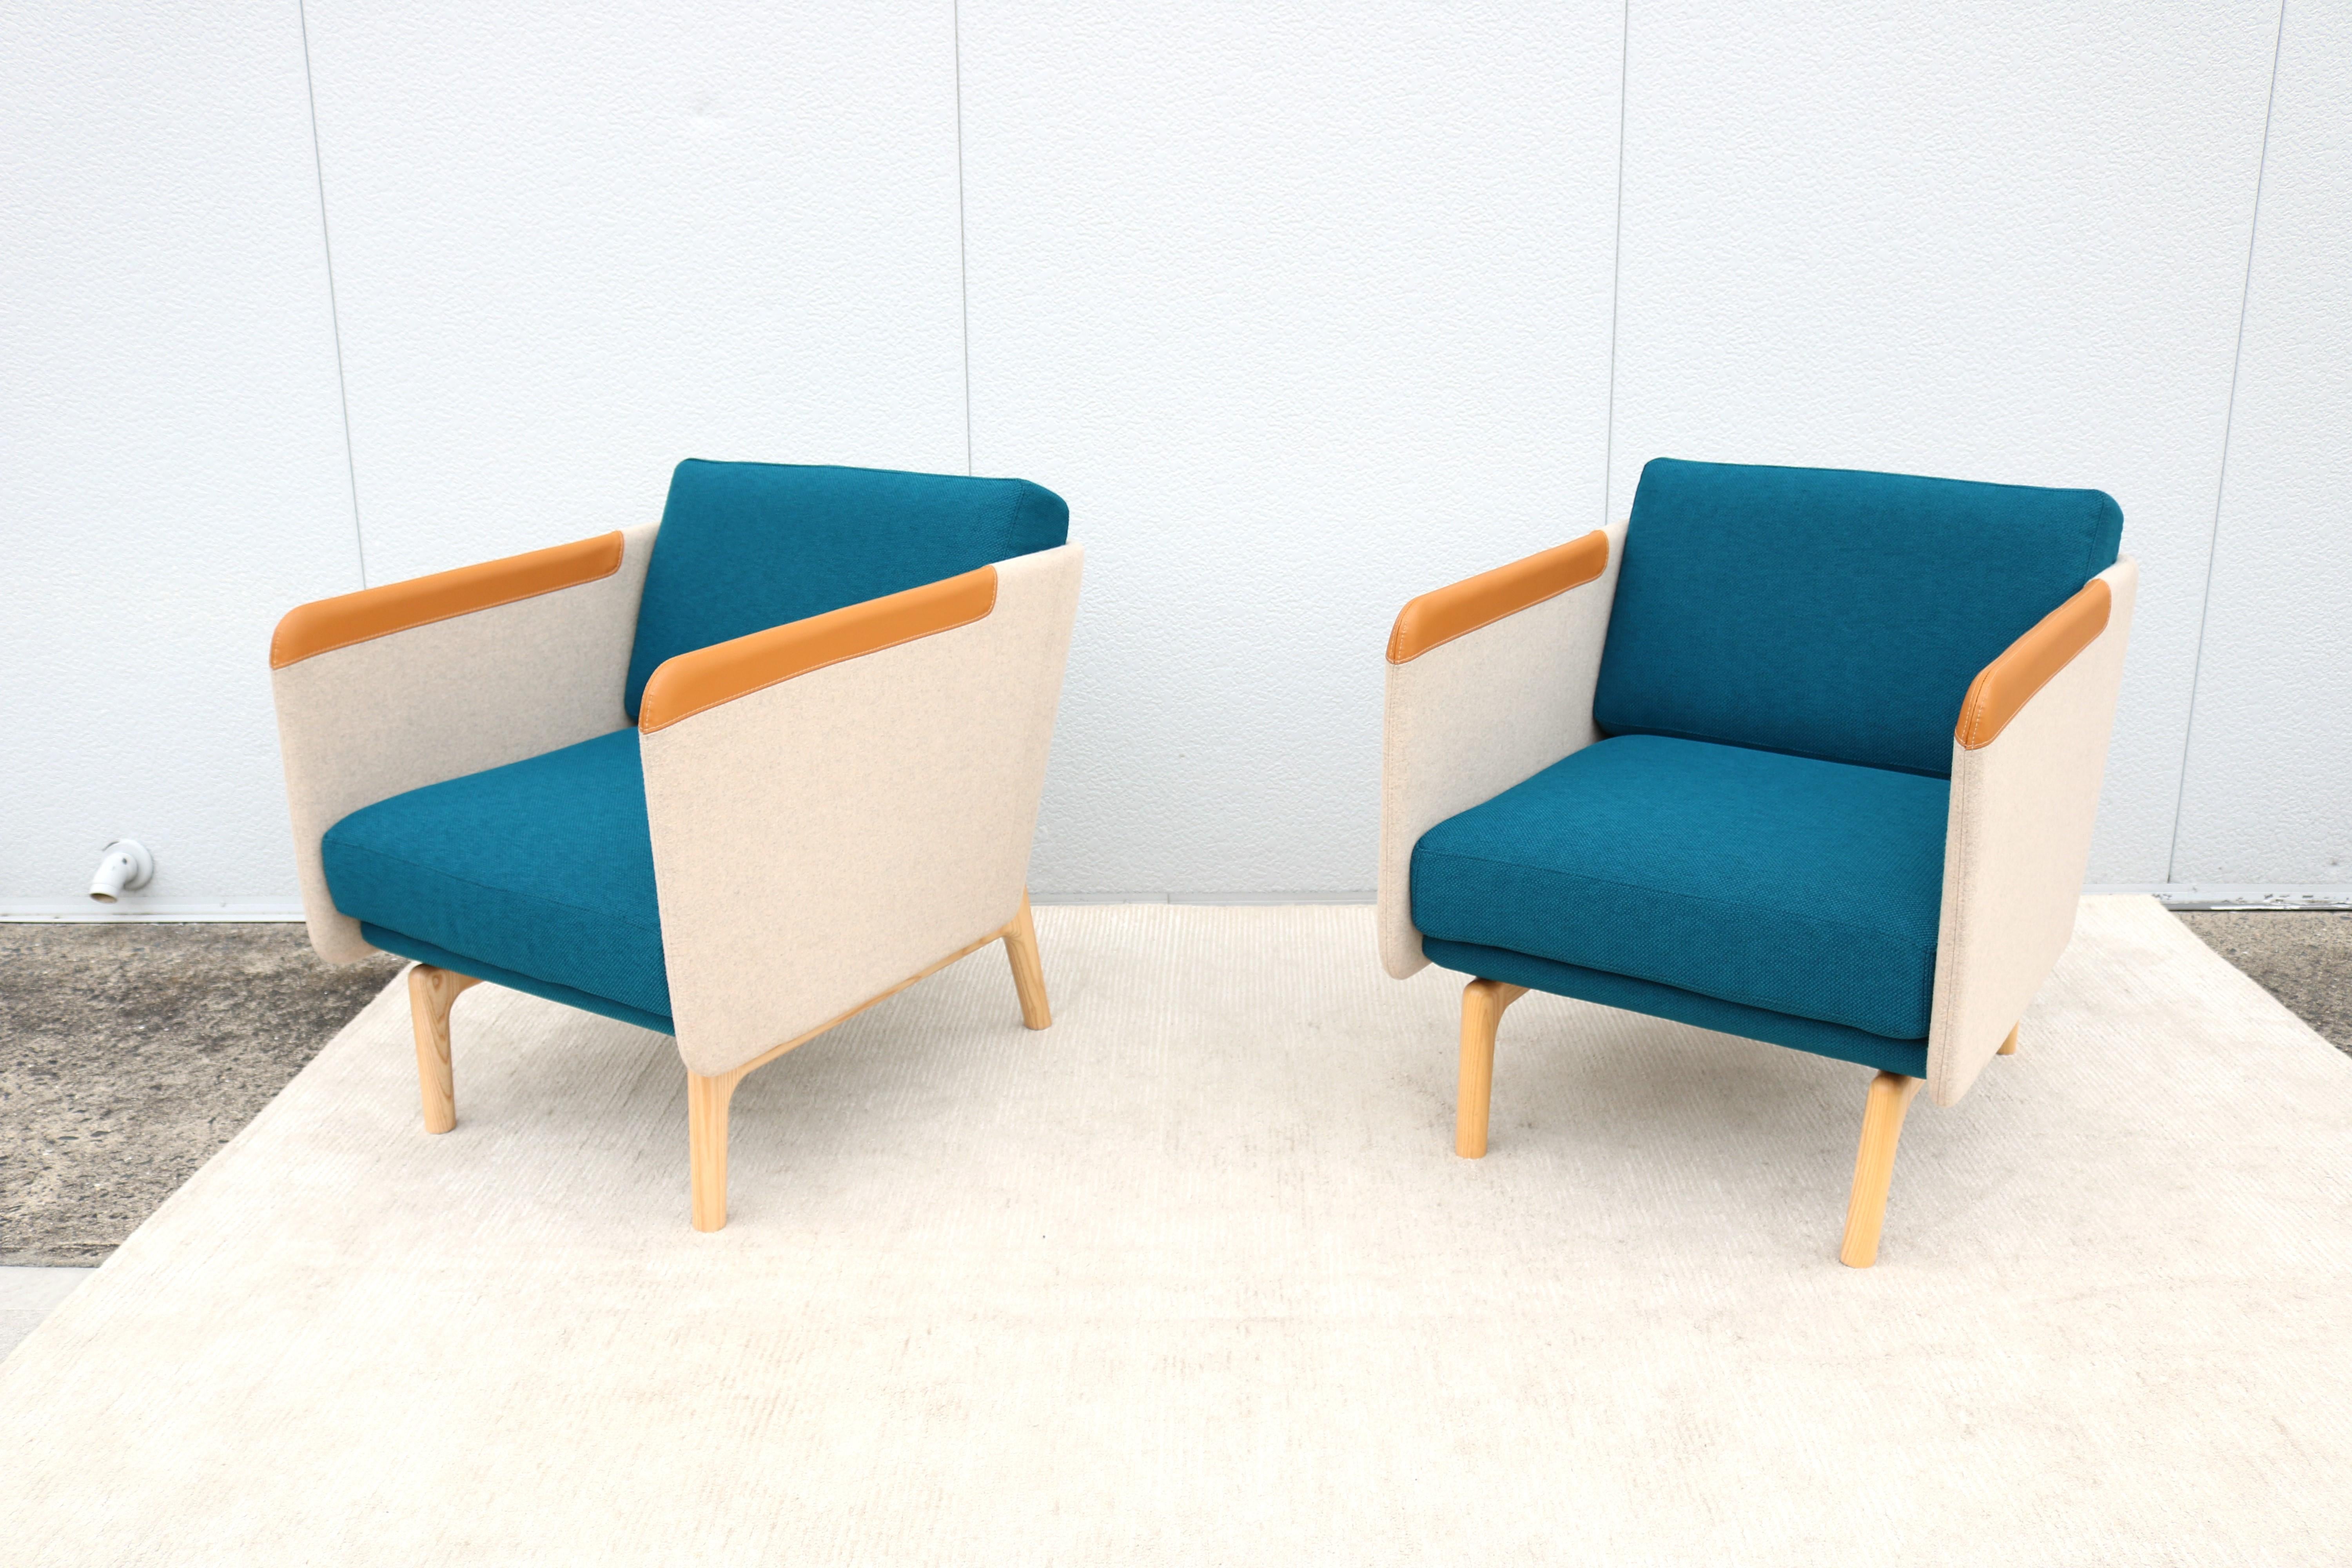 Steel Contemporary Modern Roger Webb for OFS Heya Wool Lounge Chairs - a Pair For Sale